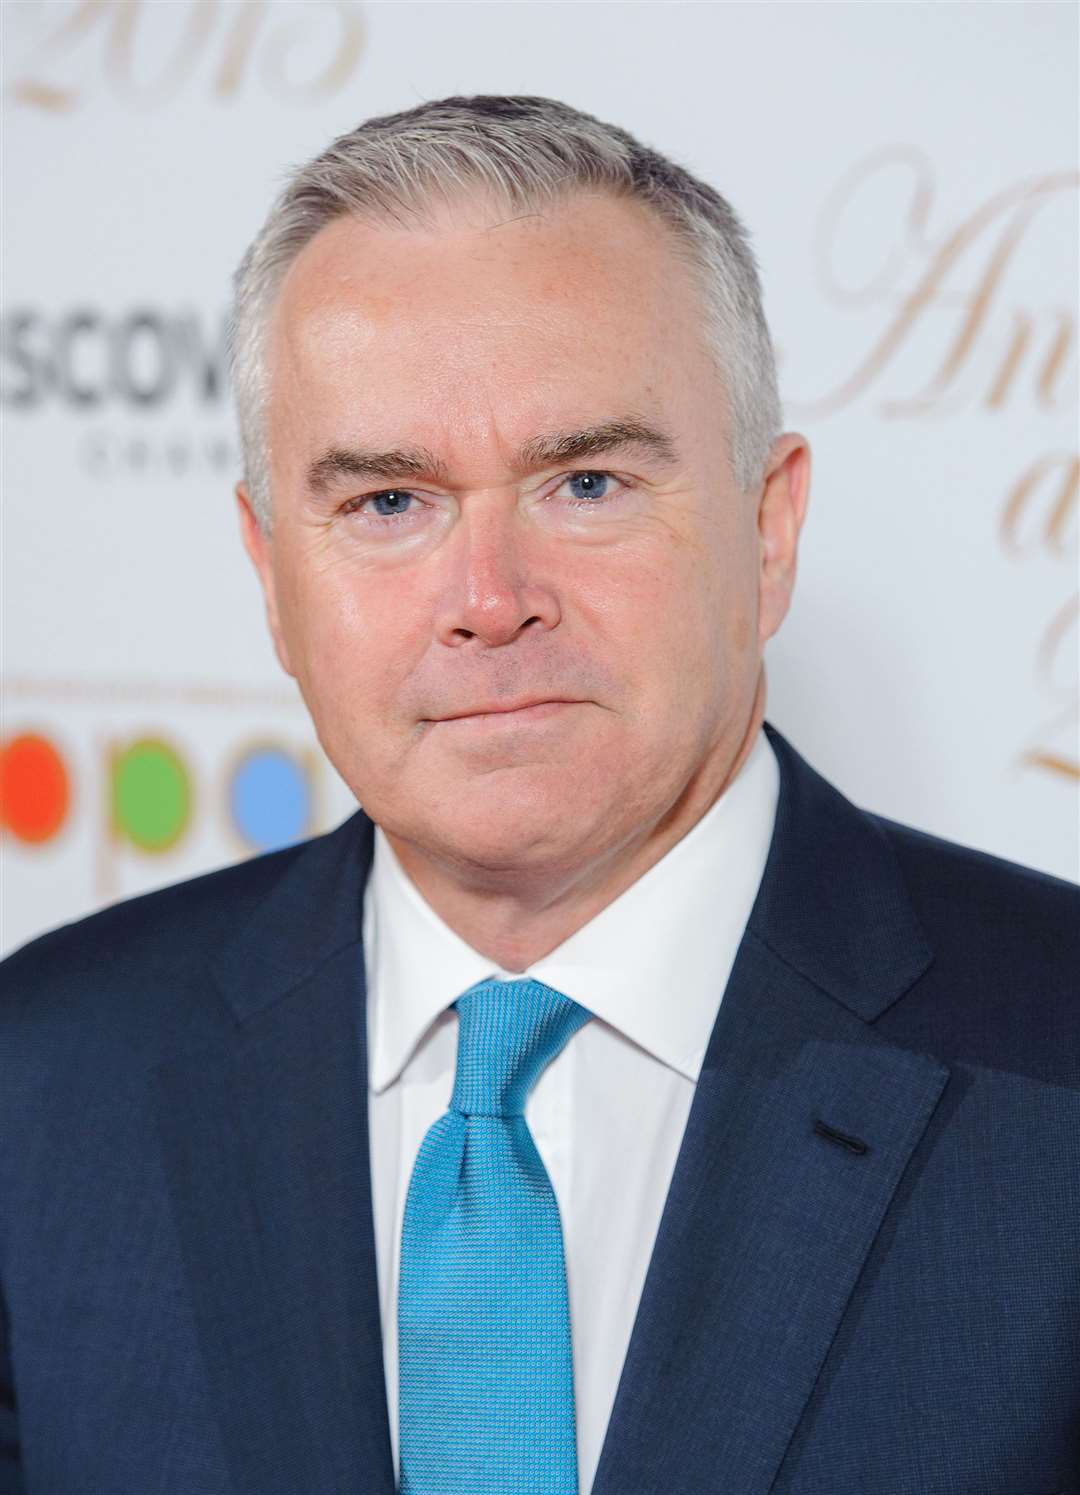 Huw Edwards said in 2021 that he was considering his future presenting News At Ten as he approached his 60th birthday (Dominic Lipinski/PA)